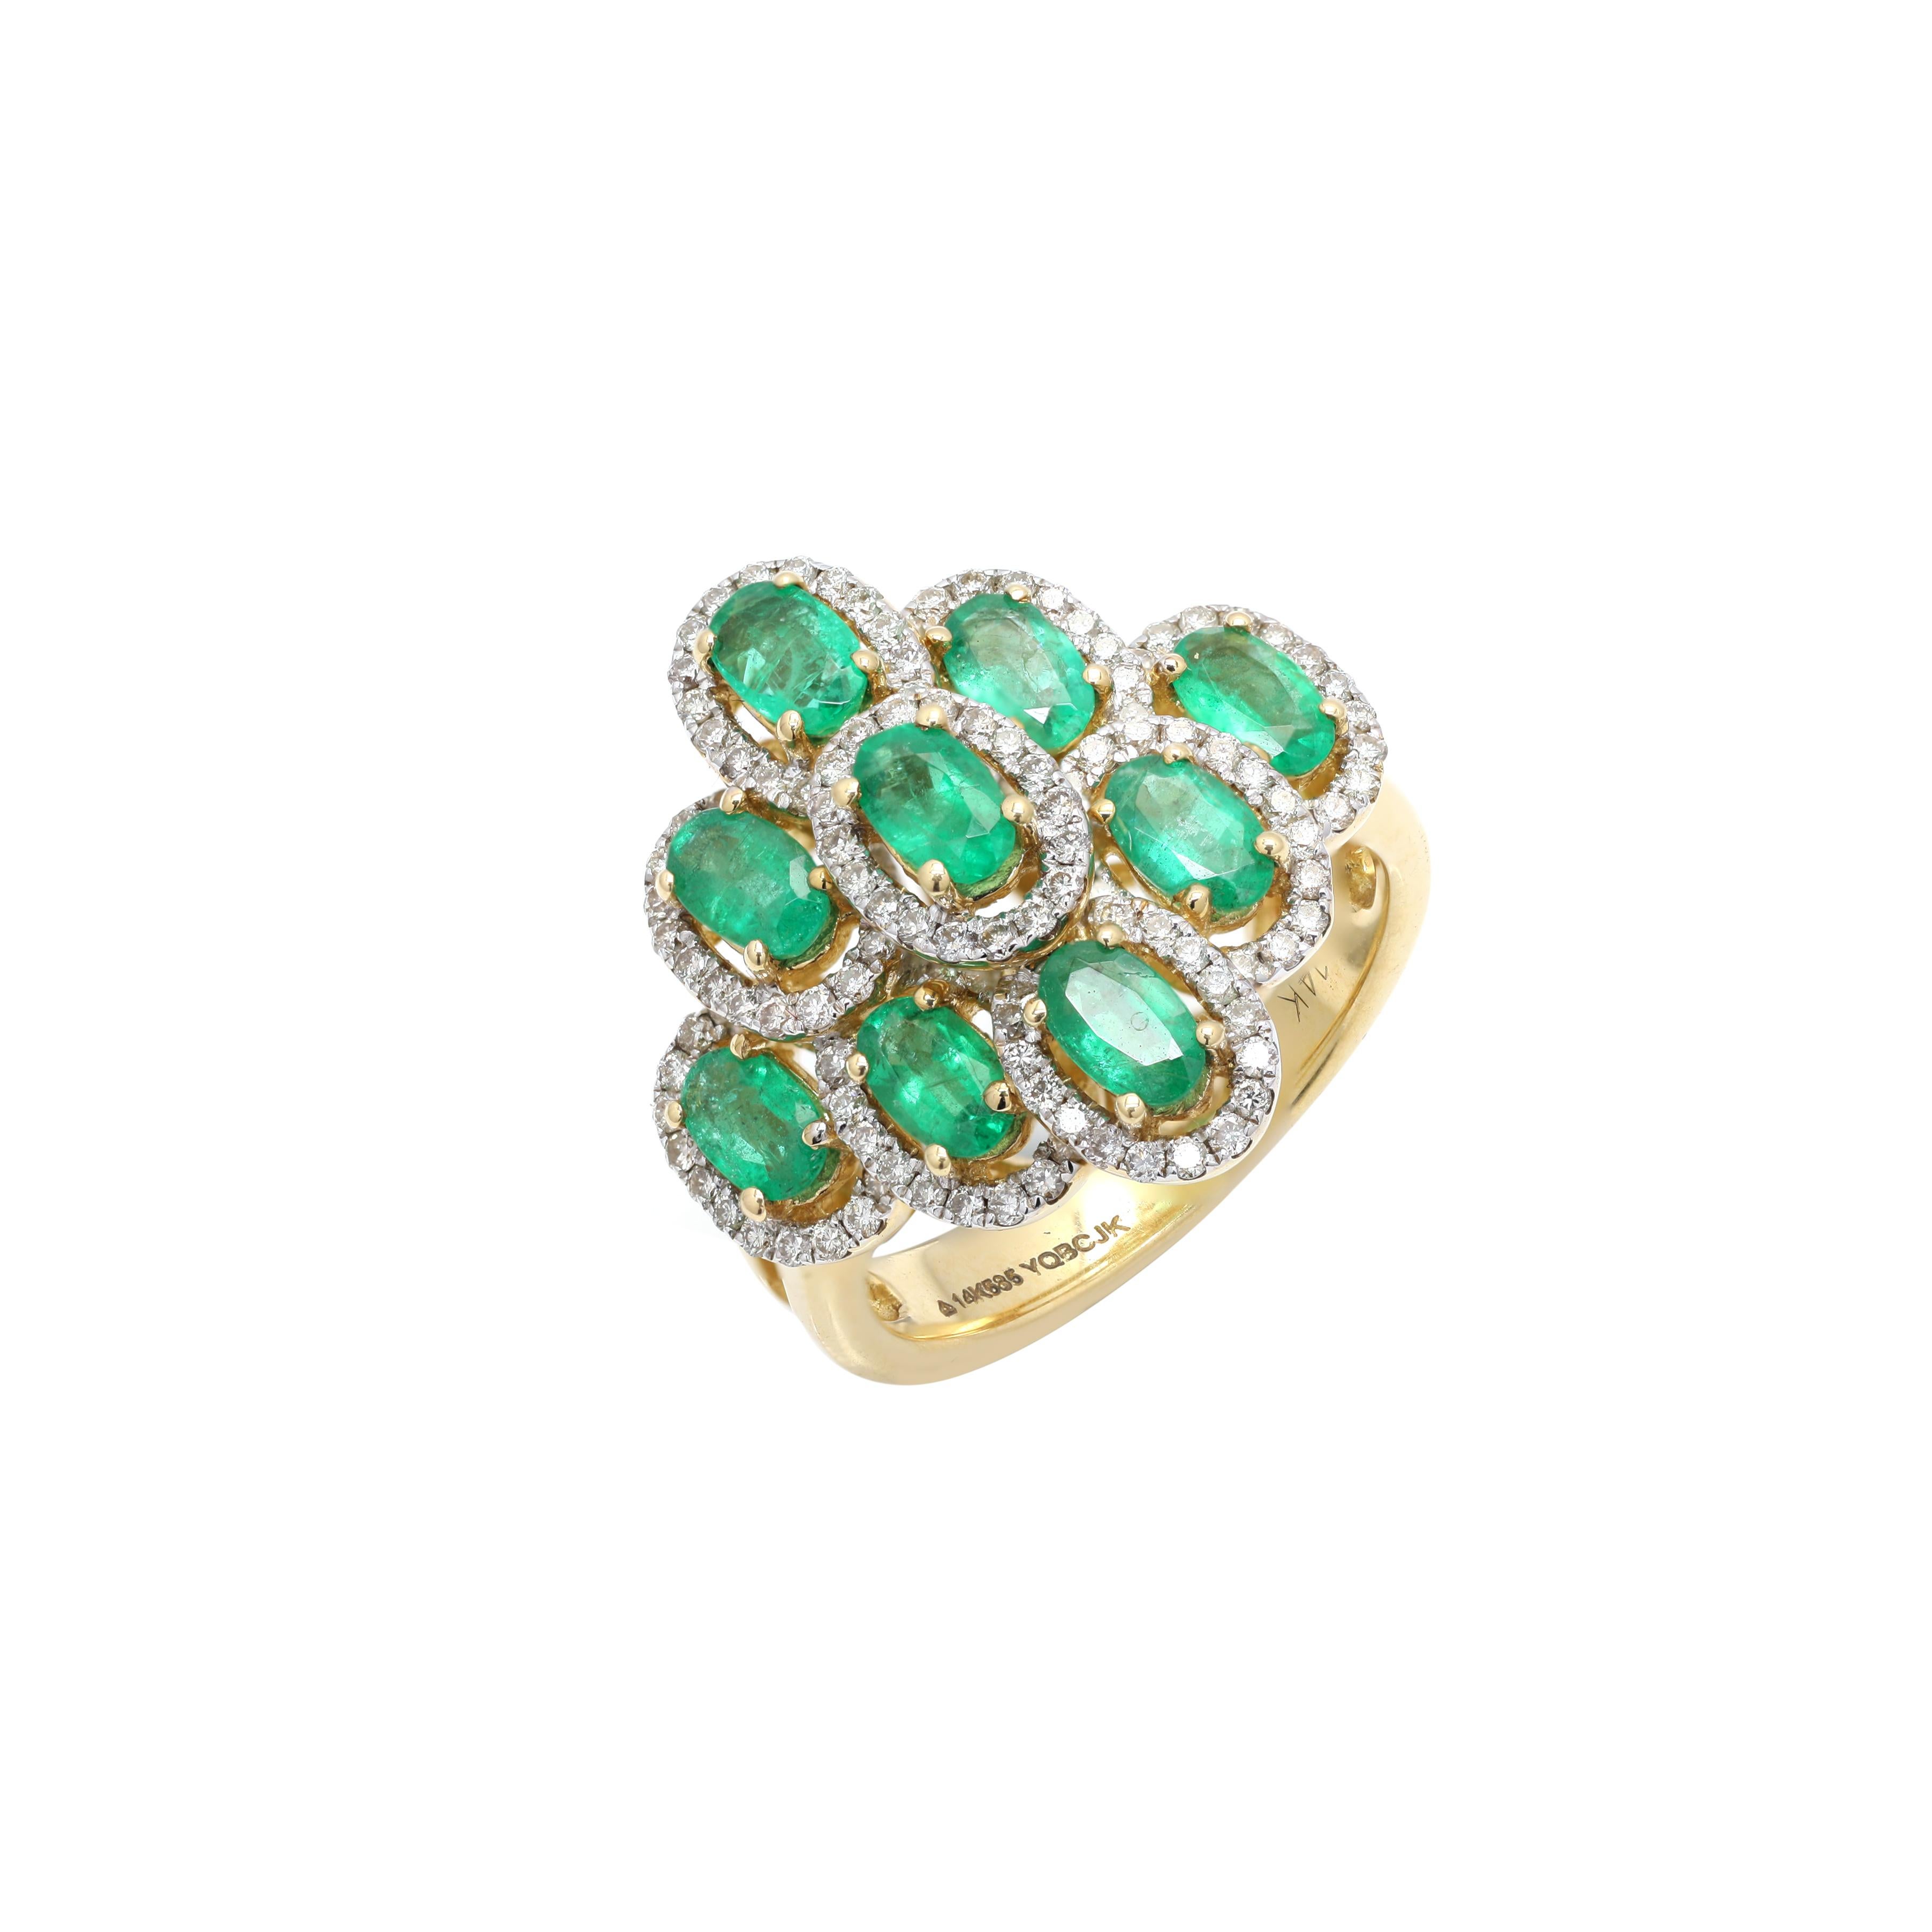 For Sale:  Estate 14k Yellow Gold 2.25 Carat Diamond Emerald Ring Cluster Cocktail Ring 4